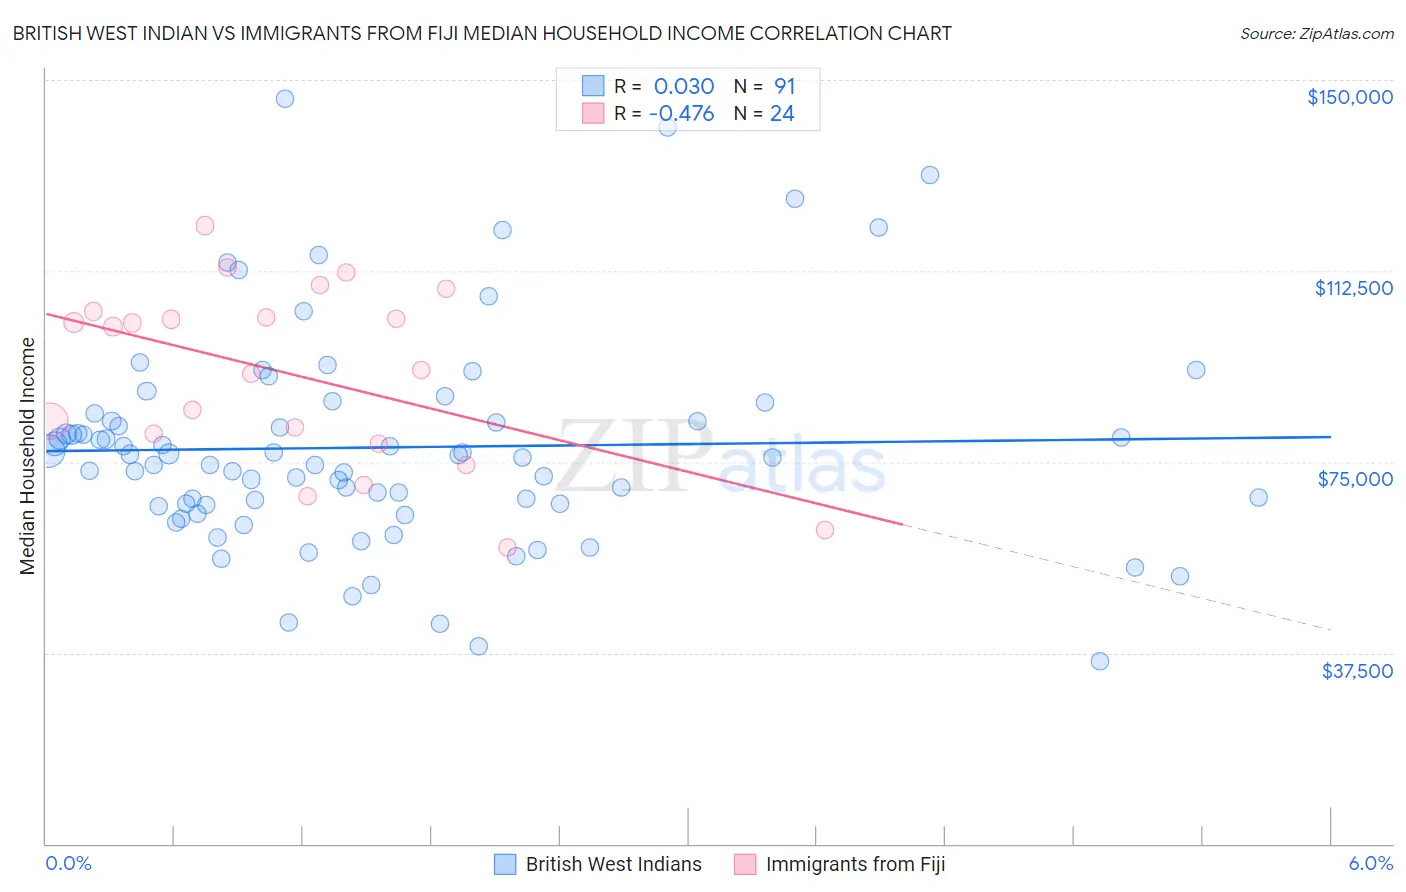 British West Indian vs Immigrants from Fiji Median Household Income